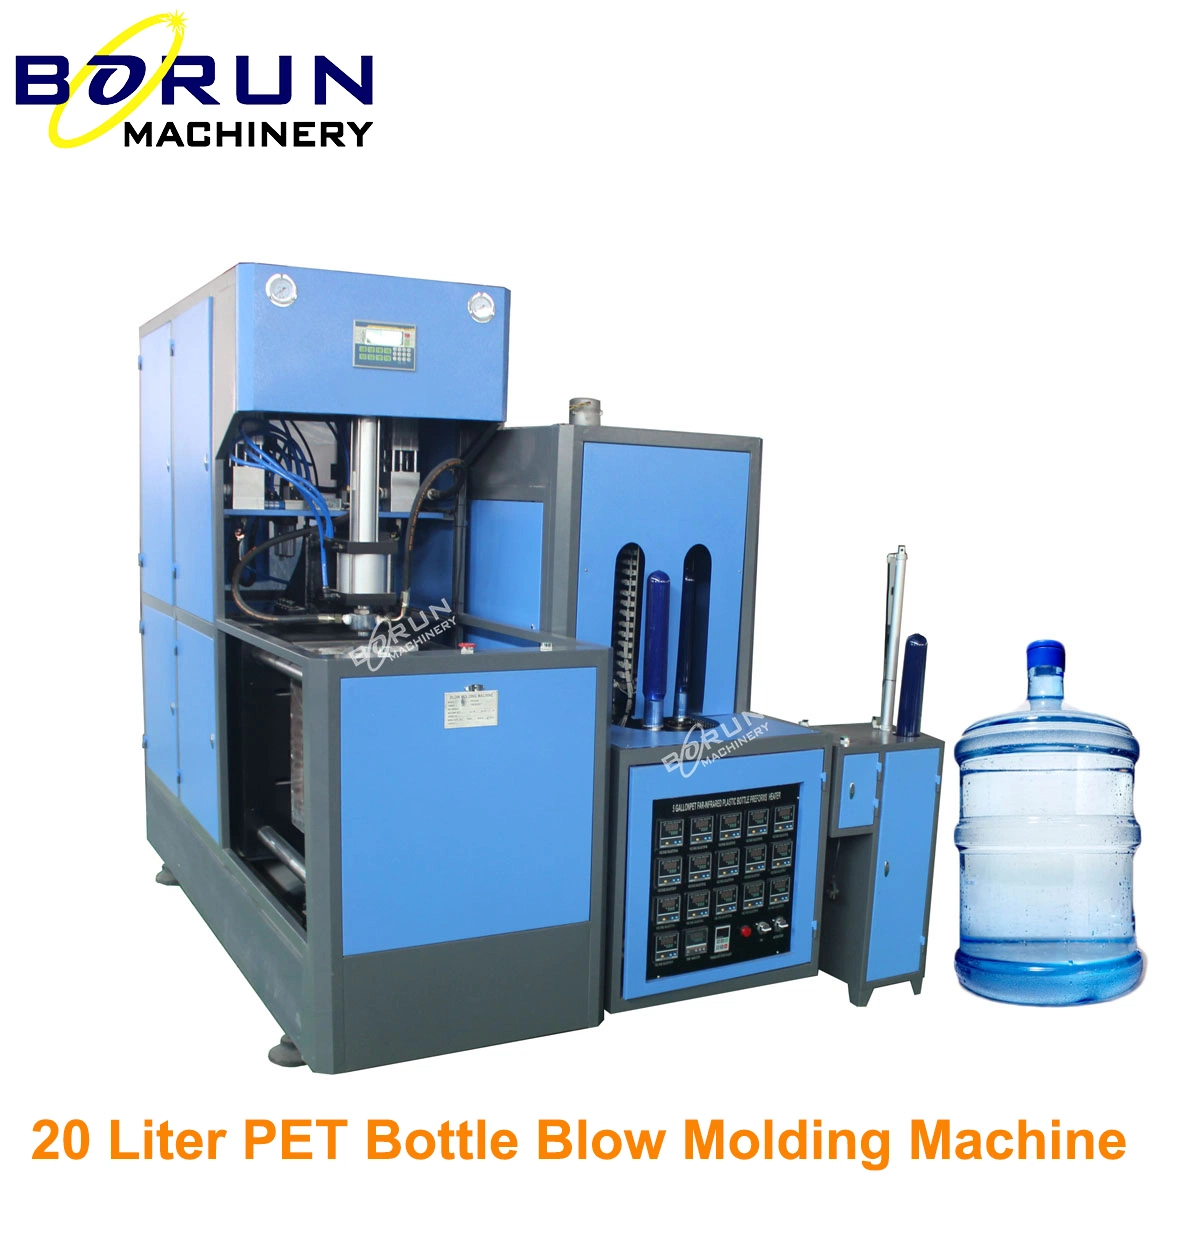 20 Liter Plastic Pet 5 Gallon Bottle Stretch Blow Molding Machine with Heating Lamp